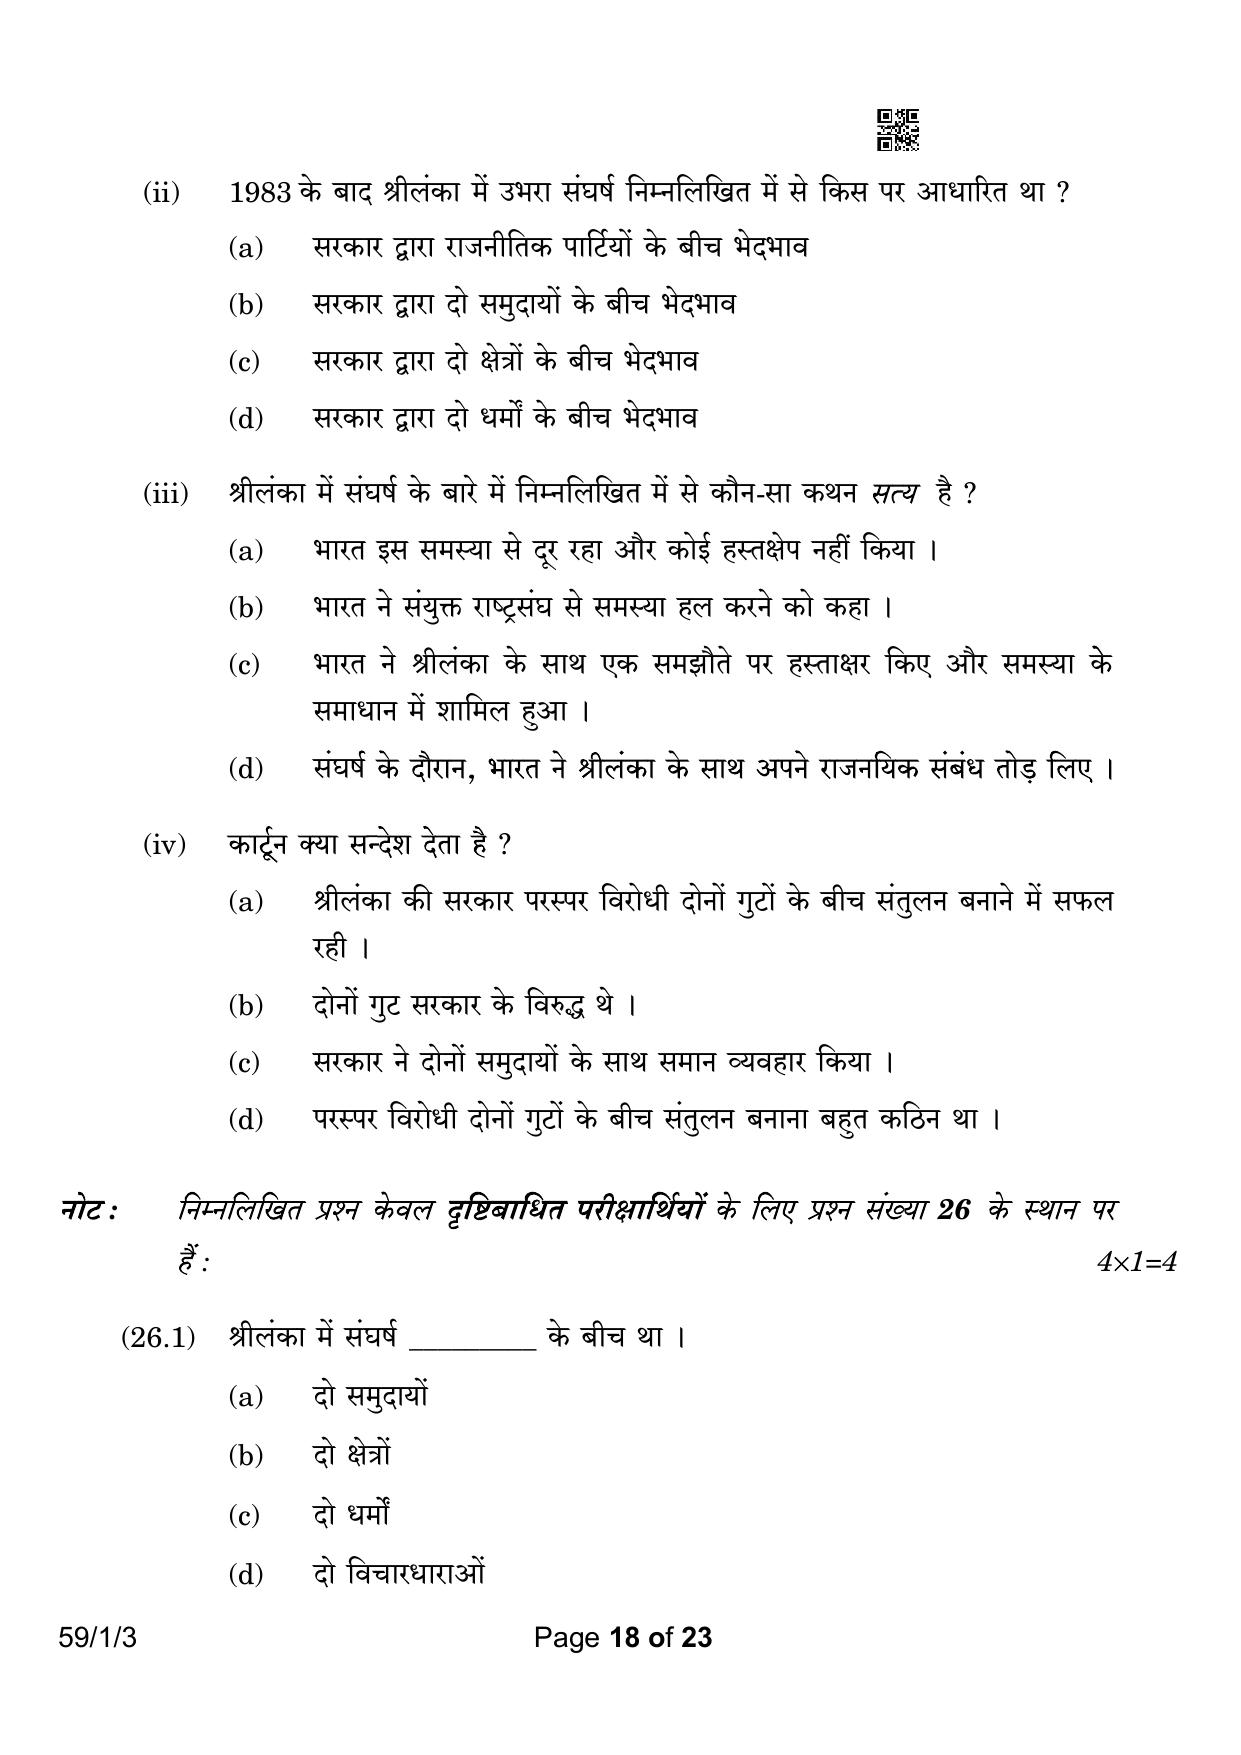 CBSE Class 12 59-1-3 Political Science 2023 Question Paper - Page 18